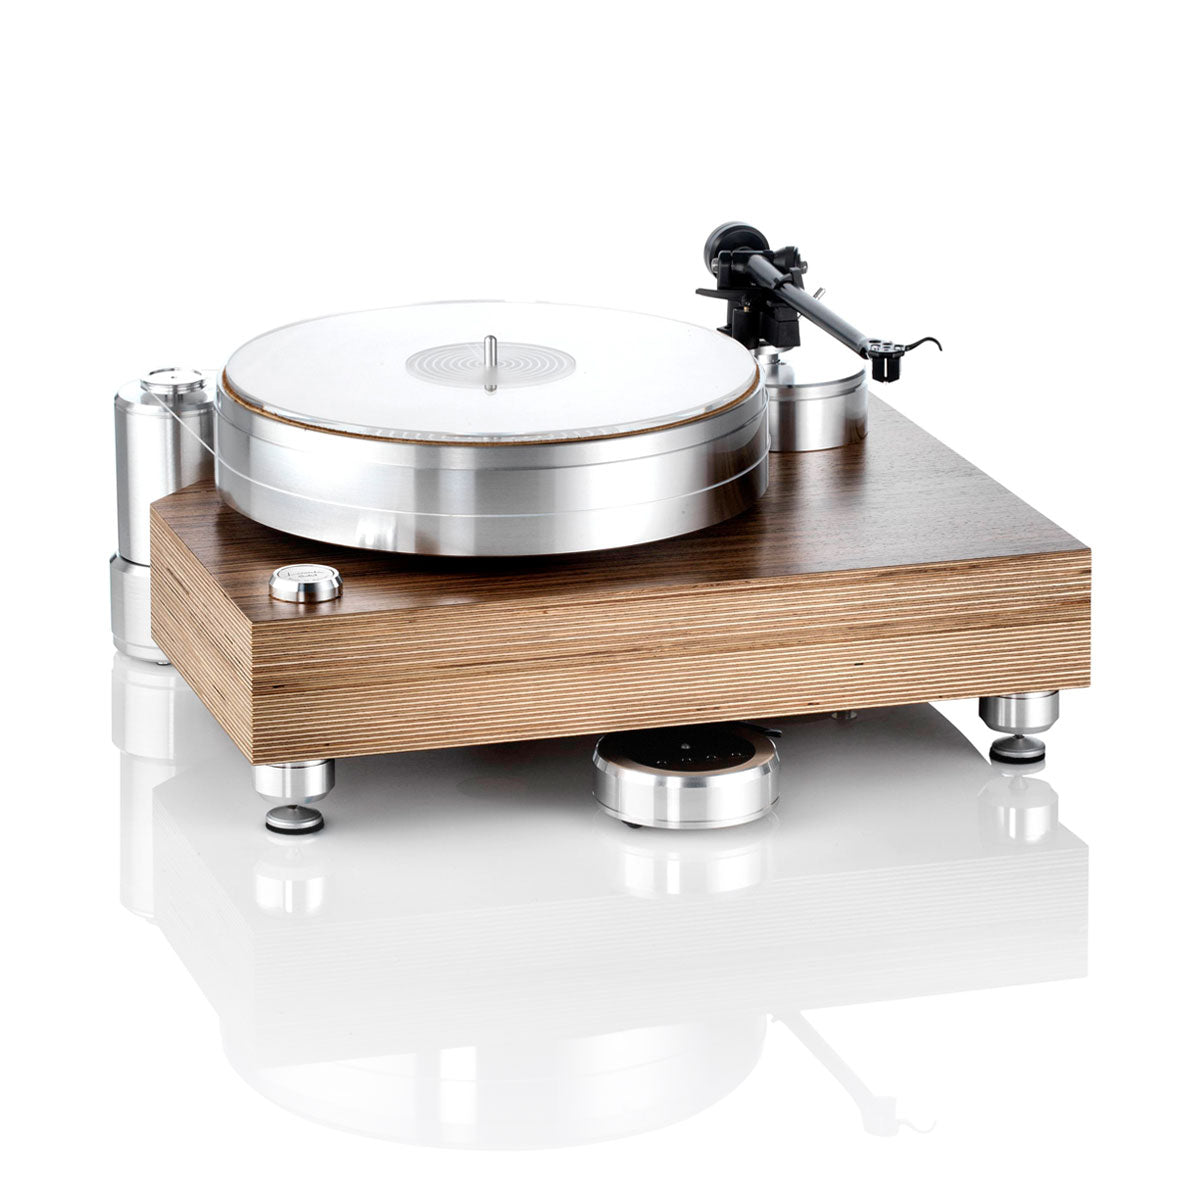 ACOUSTIC SOLID - SOLID WOOD MPX TURNTABLE - Experience a listening pleasure in perfection with the High-quality technology and acoustics with Acoustic Solid. Best price at Vinyl Sound for all Acoustic Solid Turntables, Cartridges, tonearms and Phono Amplifiers: Acoustic Solid - Solid Brake - Acoustic Solid - Solid Machine – Acoustic Solid - Solid Edition – Acoustic Solid - Solid Royal – Acoustic Solid - Solid Stand